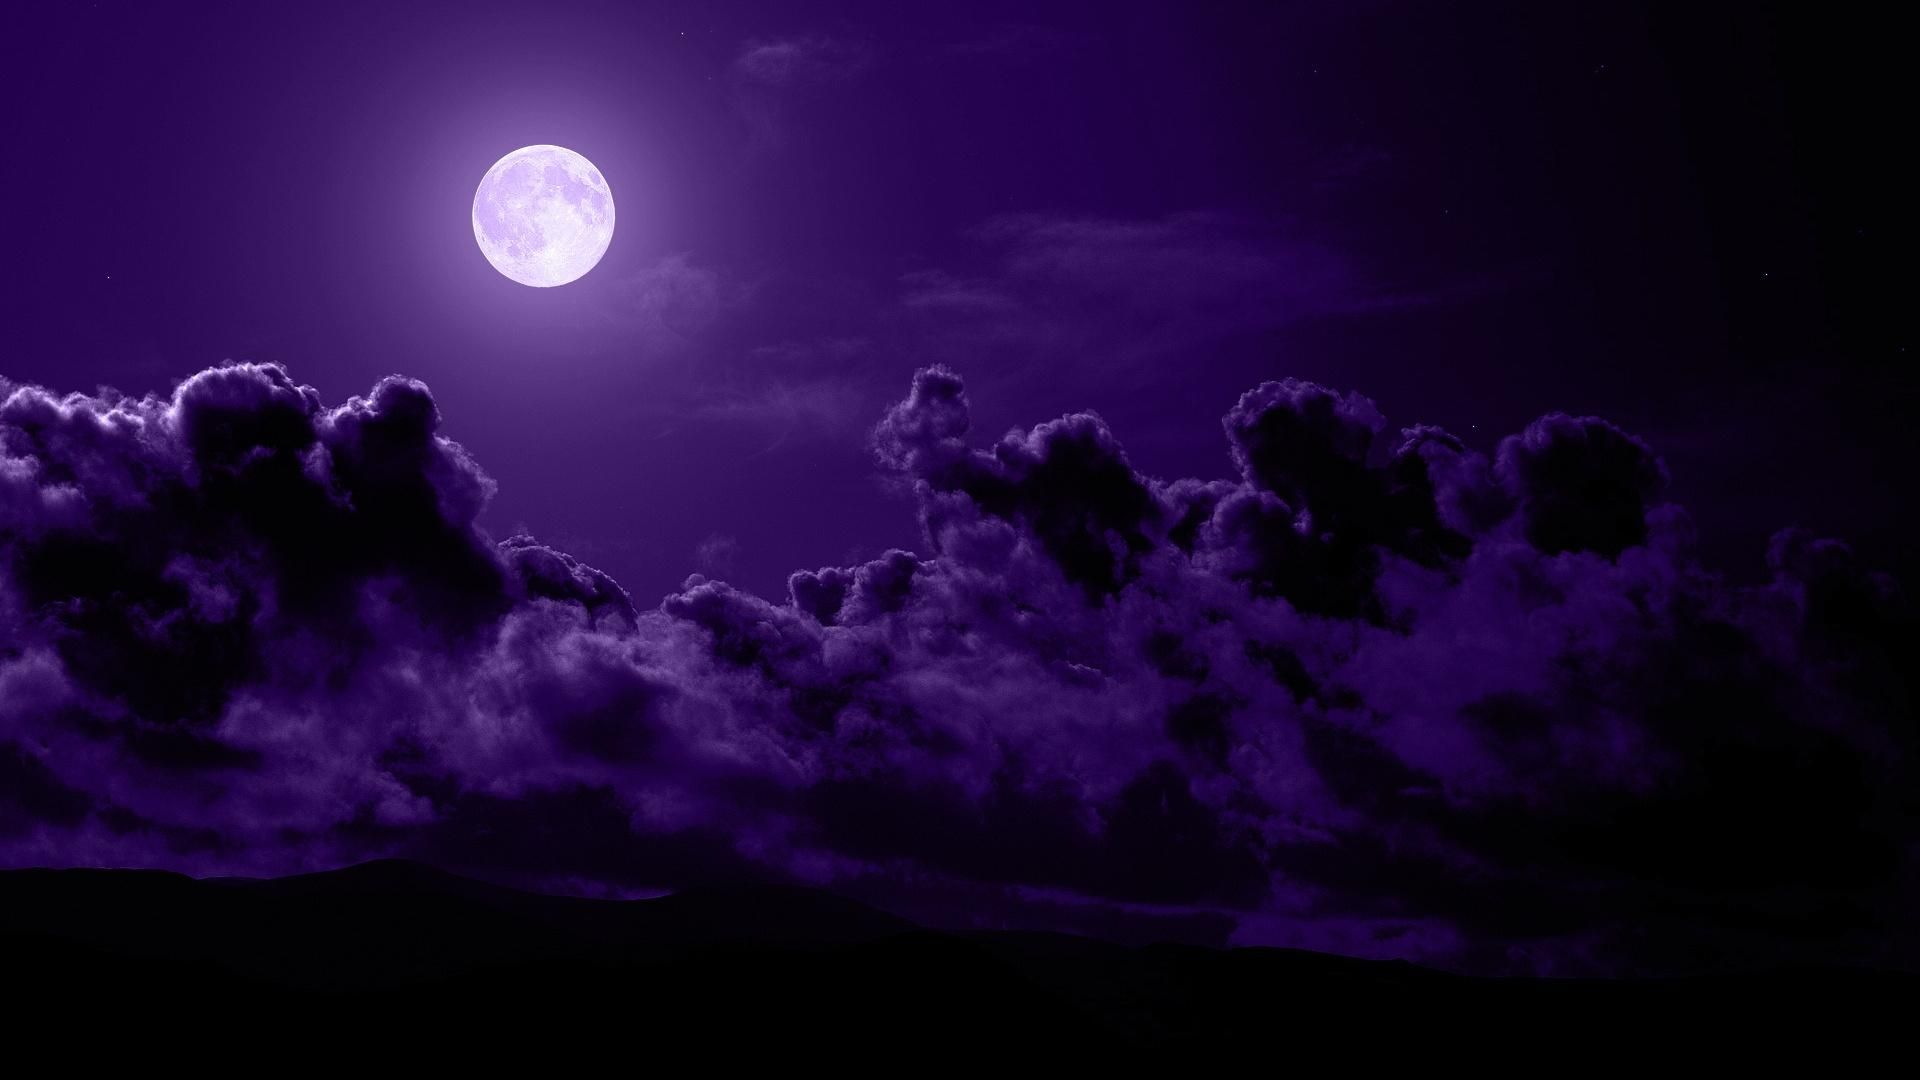 HD Moonlight Wallpaper and Photo. HD Fantasy Background